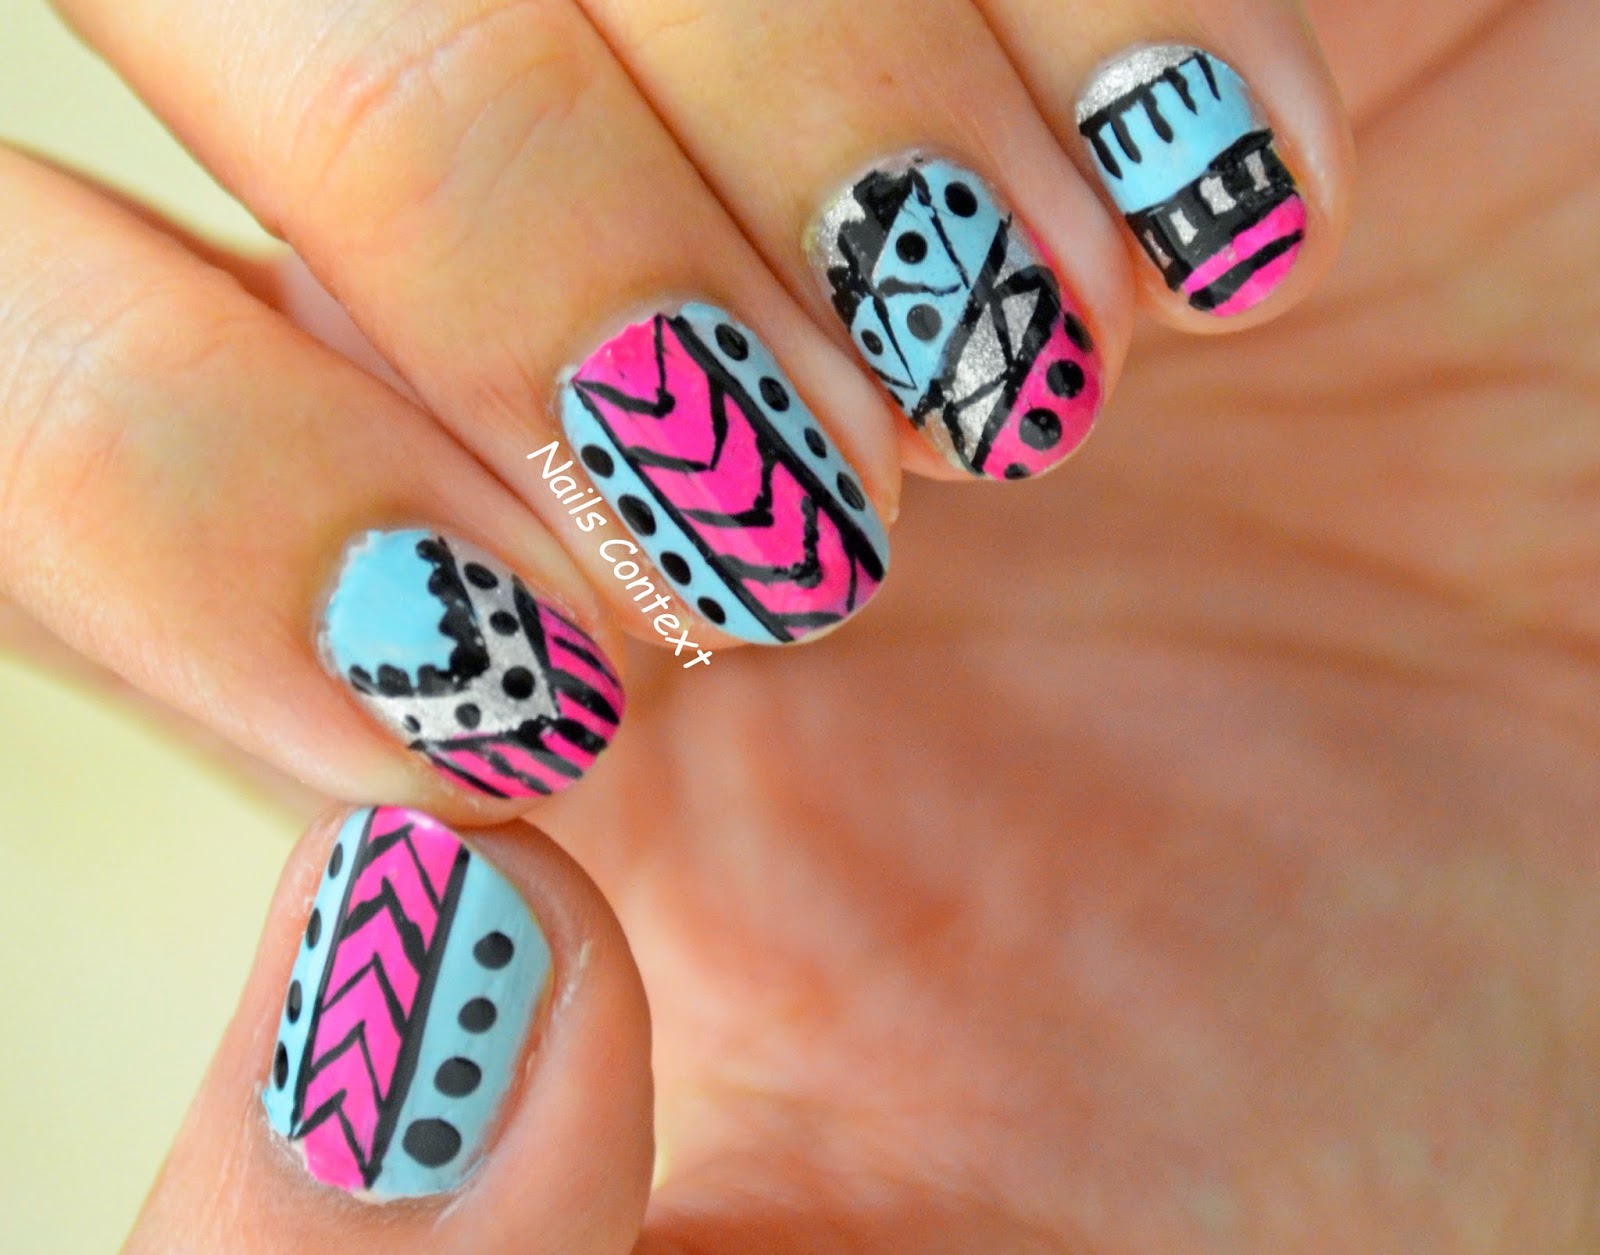 2. Tribal Nail Art Ideas for Beginners - wide 9